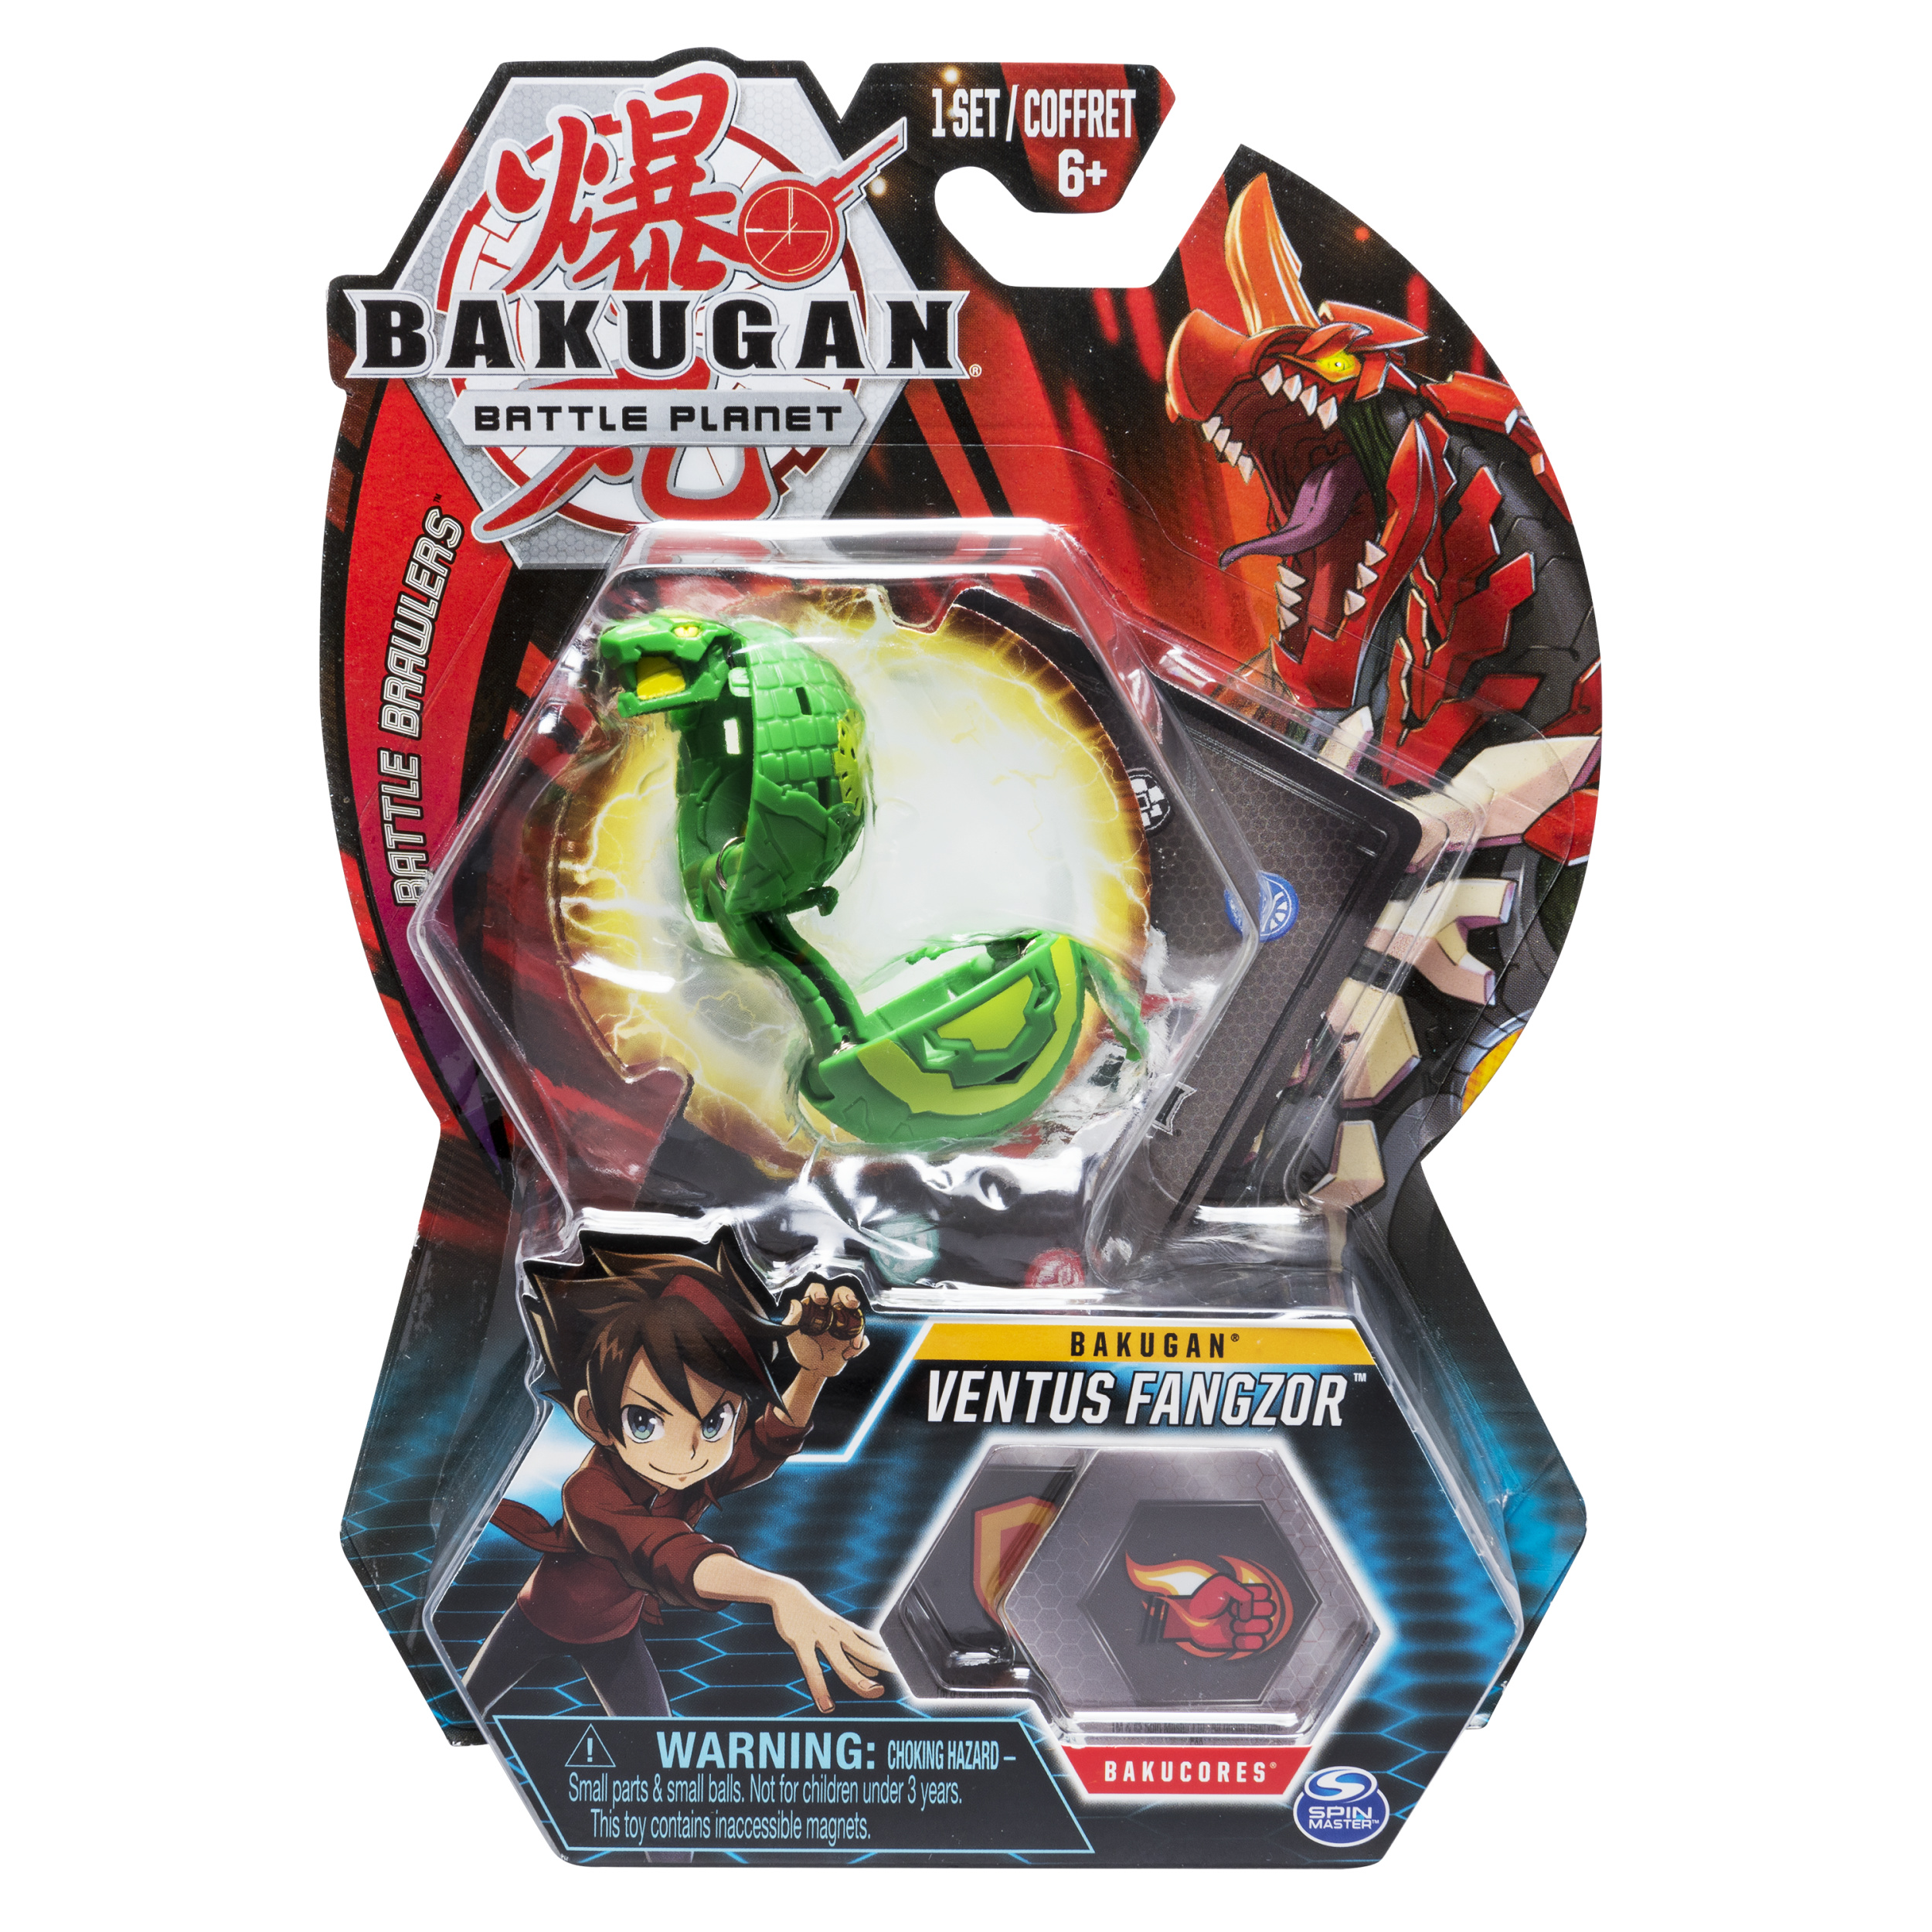 Bakugan, Ventus Fangzor, 2-inch Tall Collectible Action Figure and Trading Card, for Ages 6 and Up - image 1 of 5